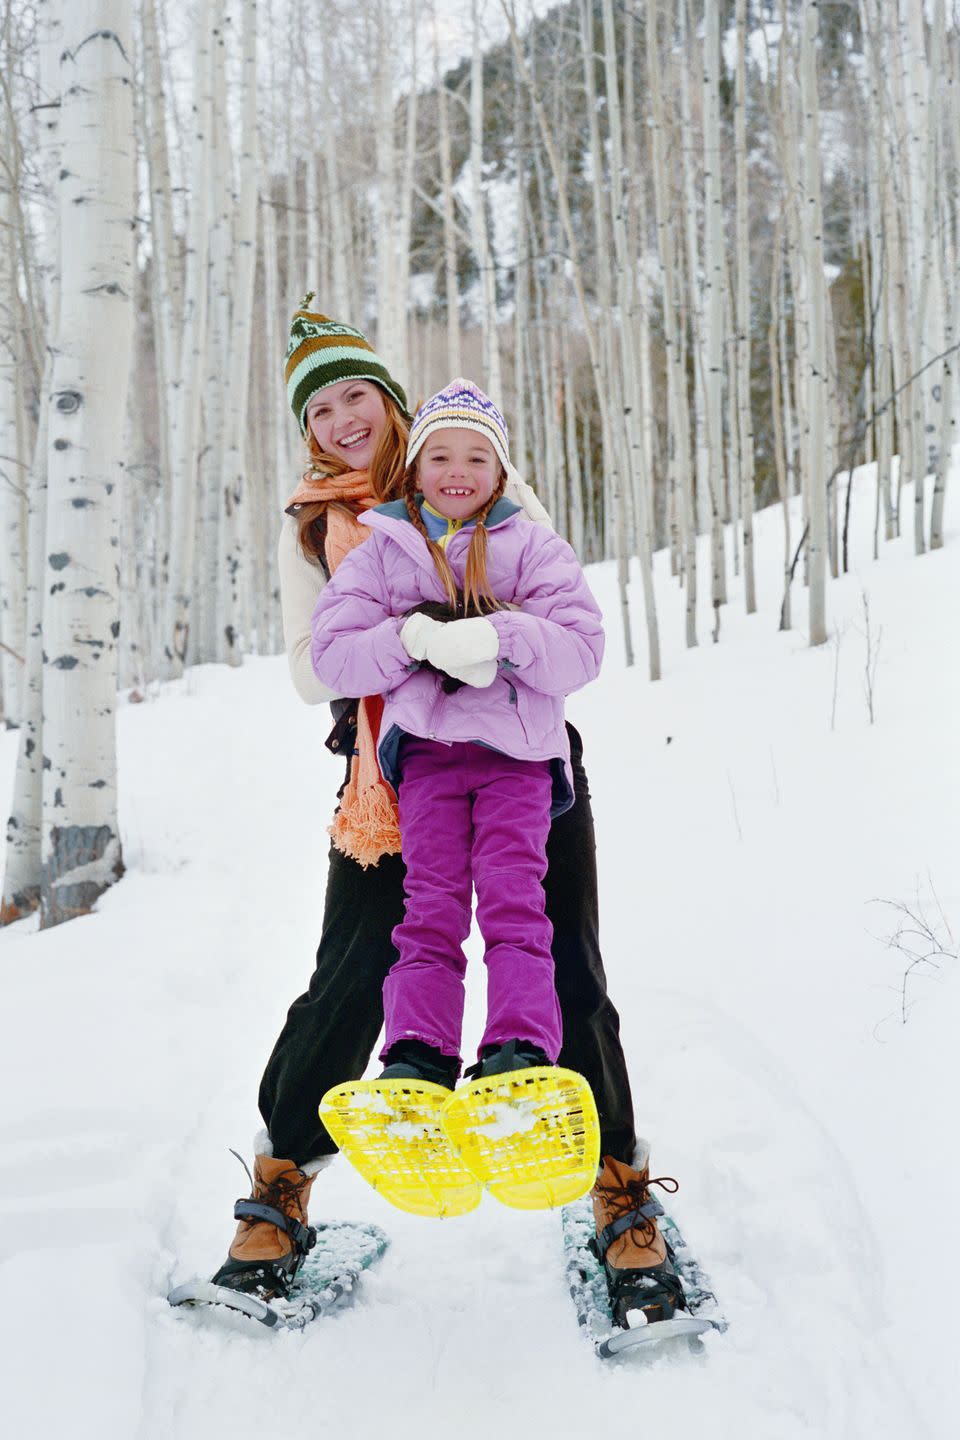 WITH YOUR DAUGHTER: Have a take-no-prisoners snowball fight.